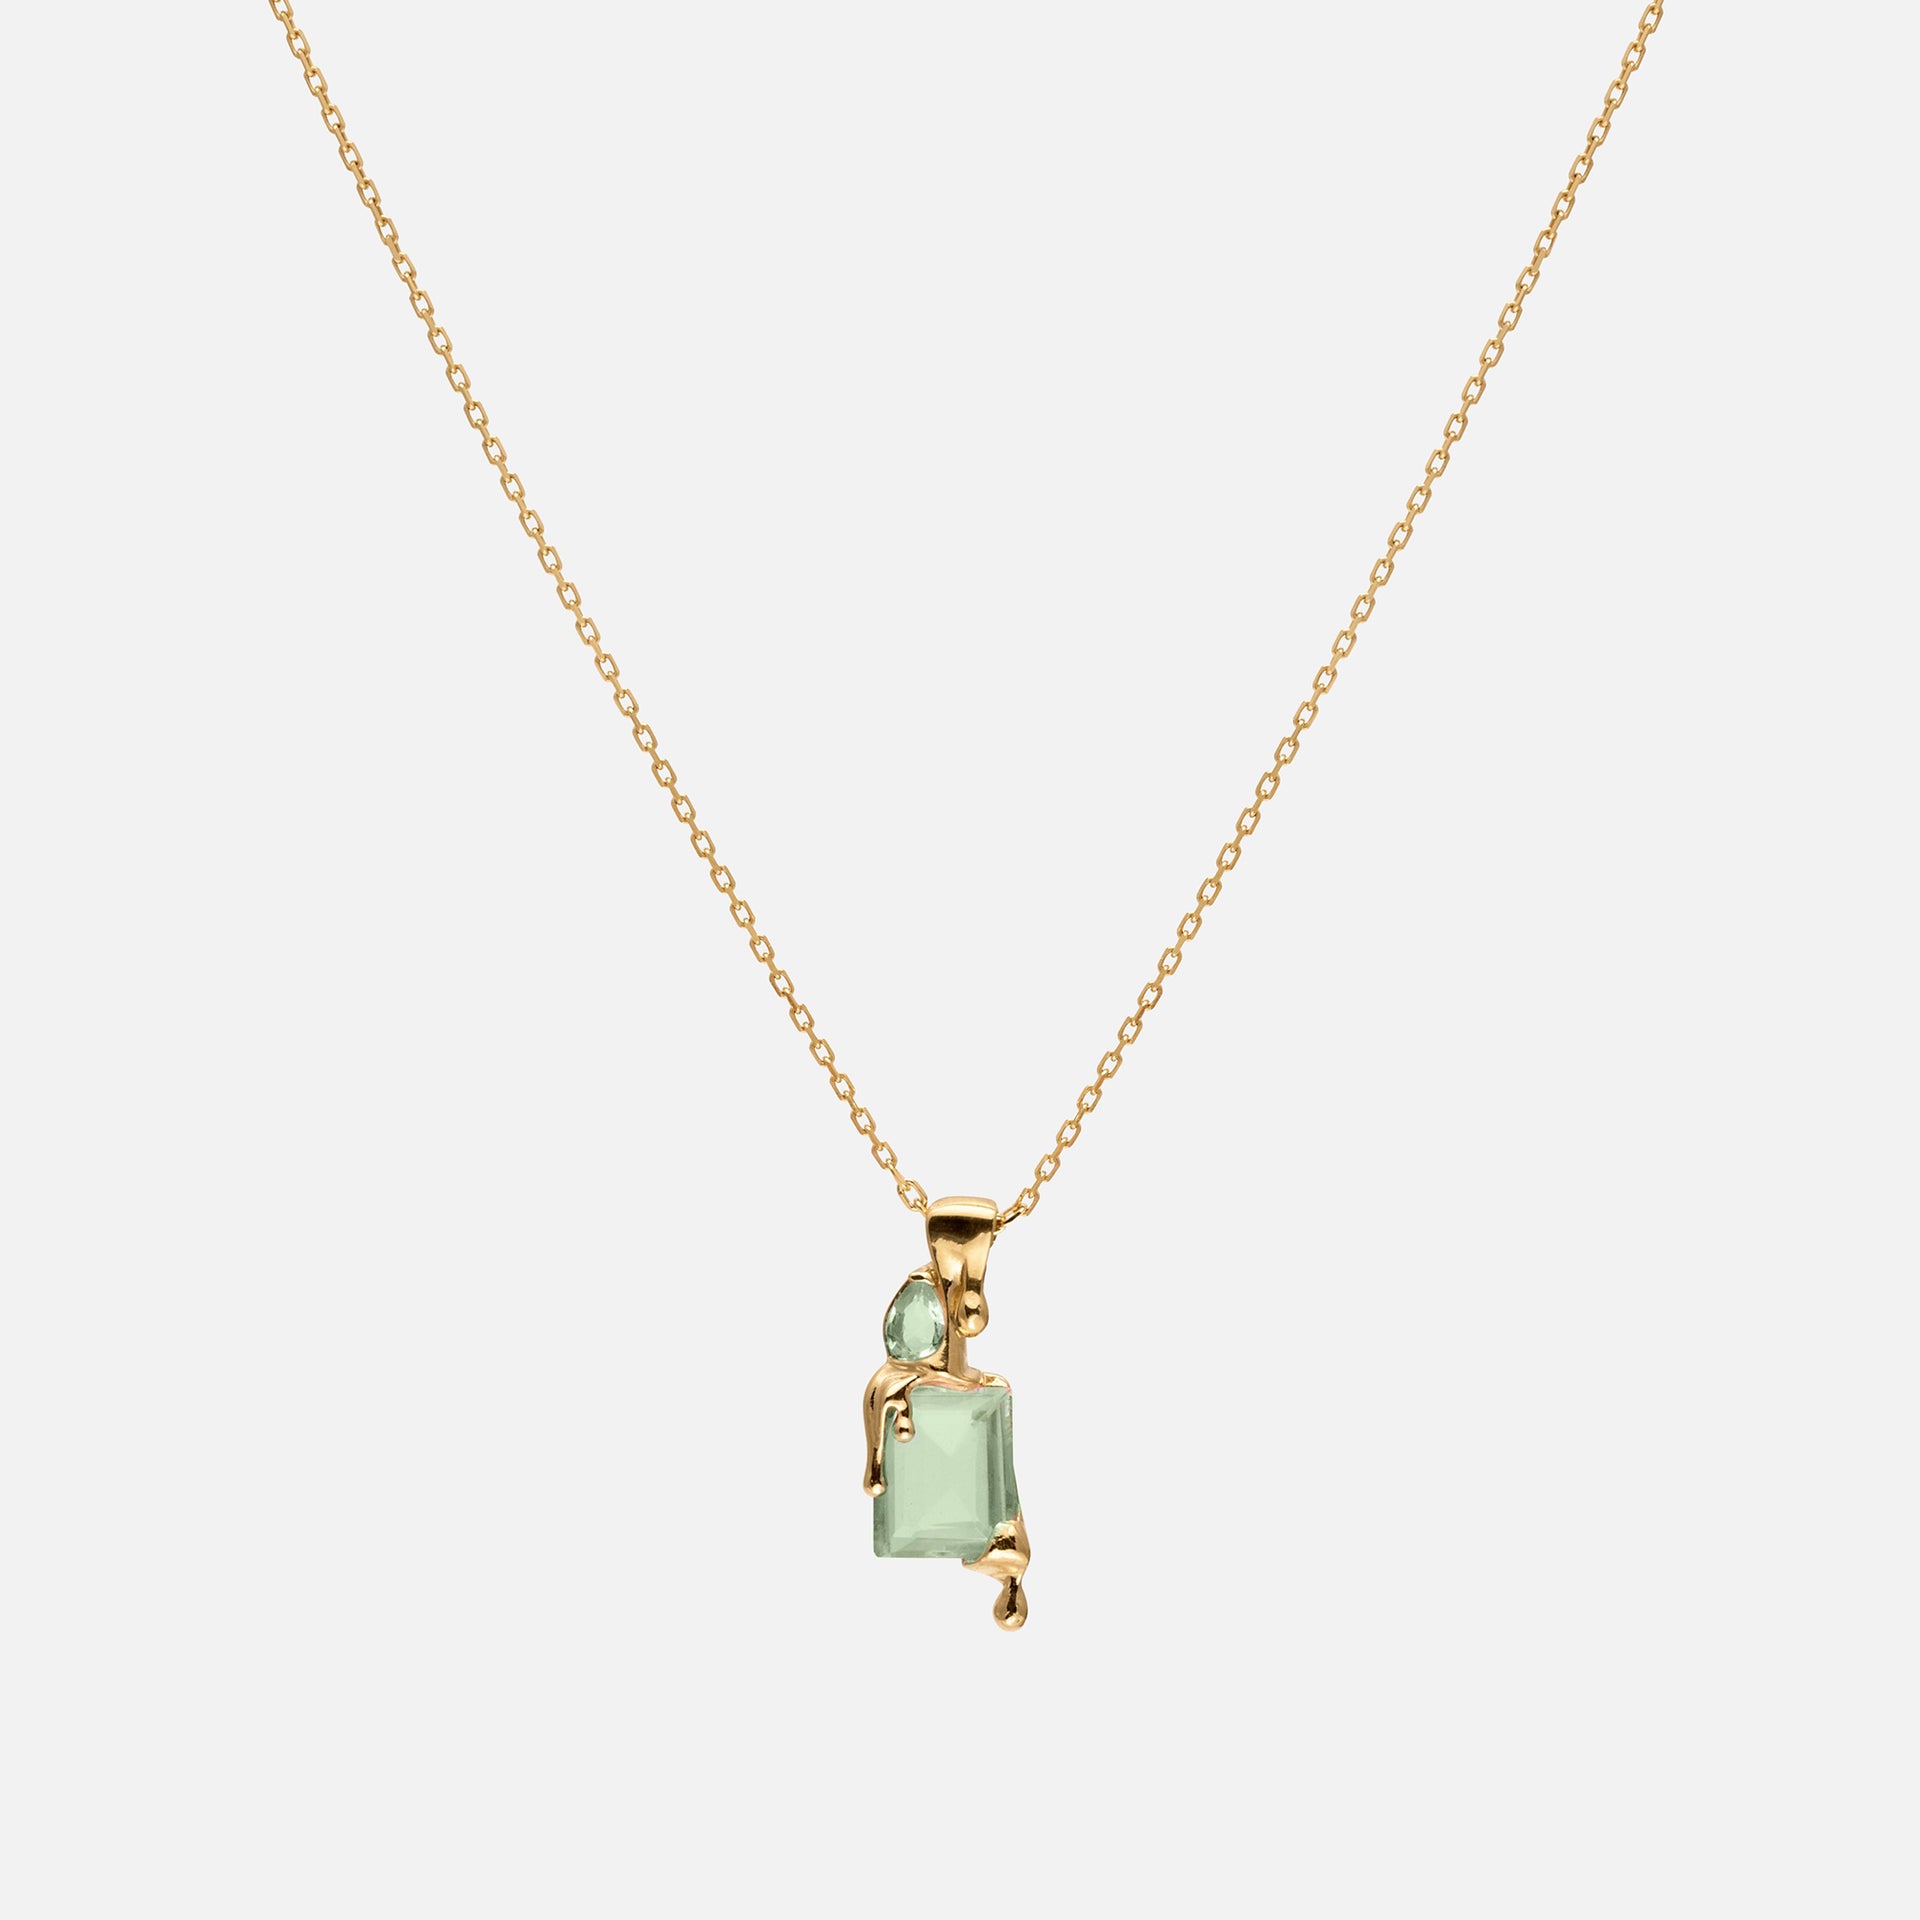 Alan Crocetti Melting Necklace - Green Gold